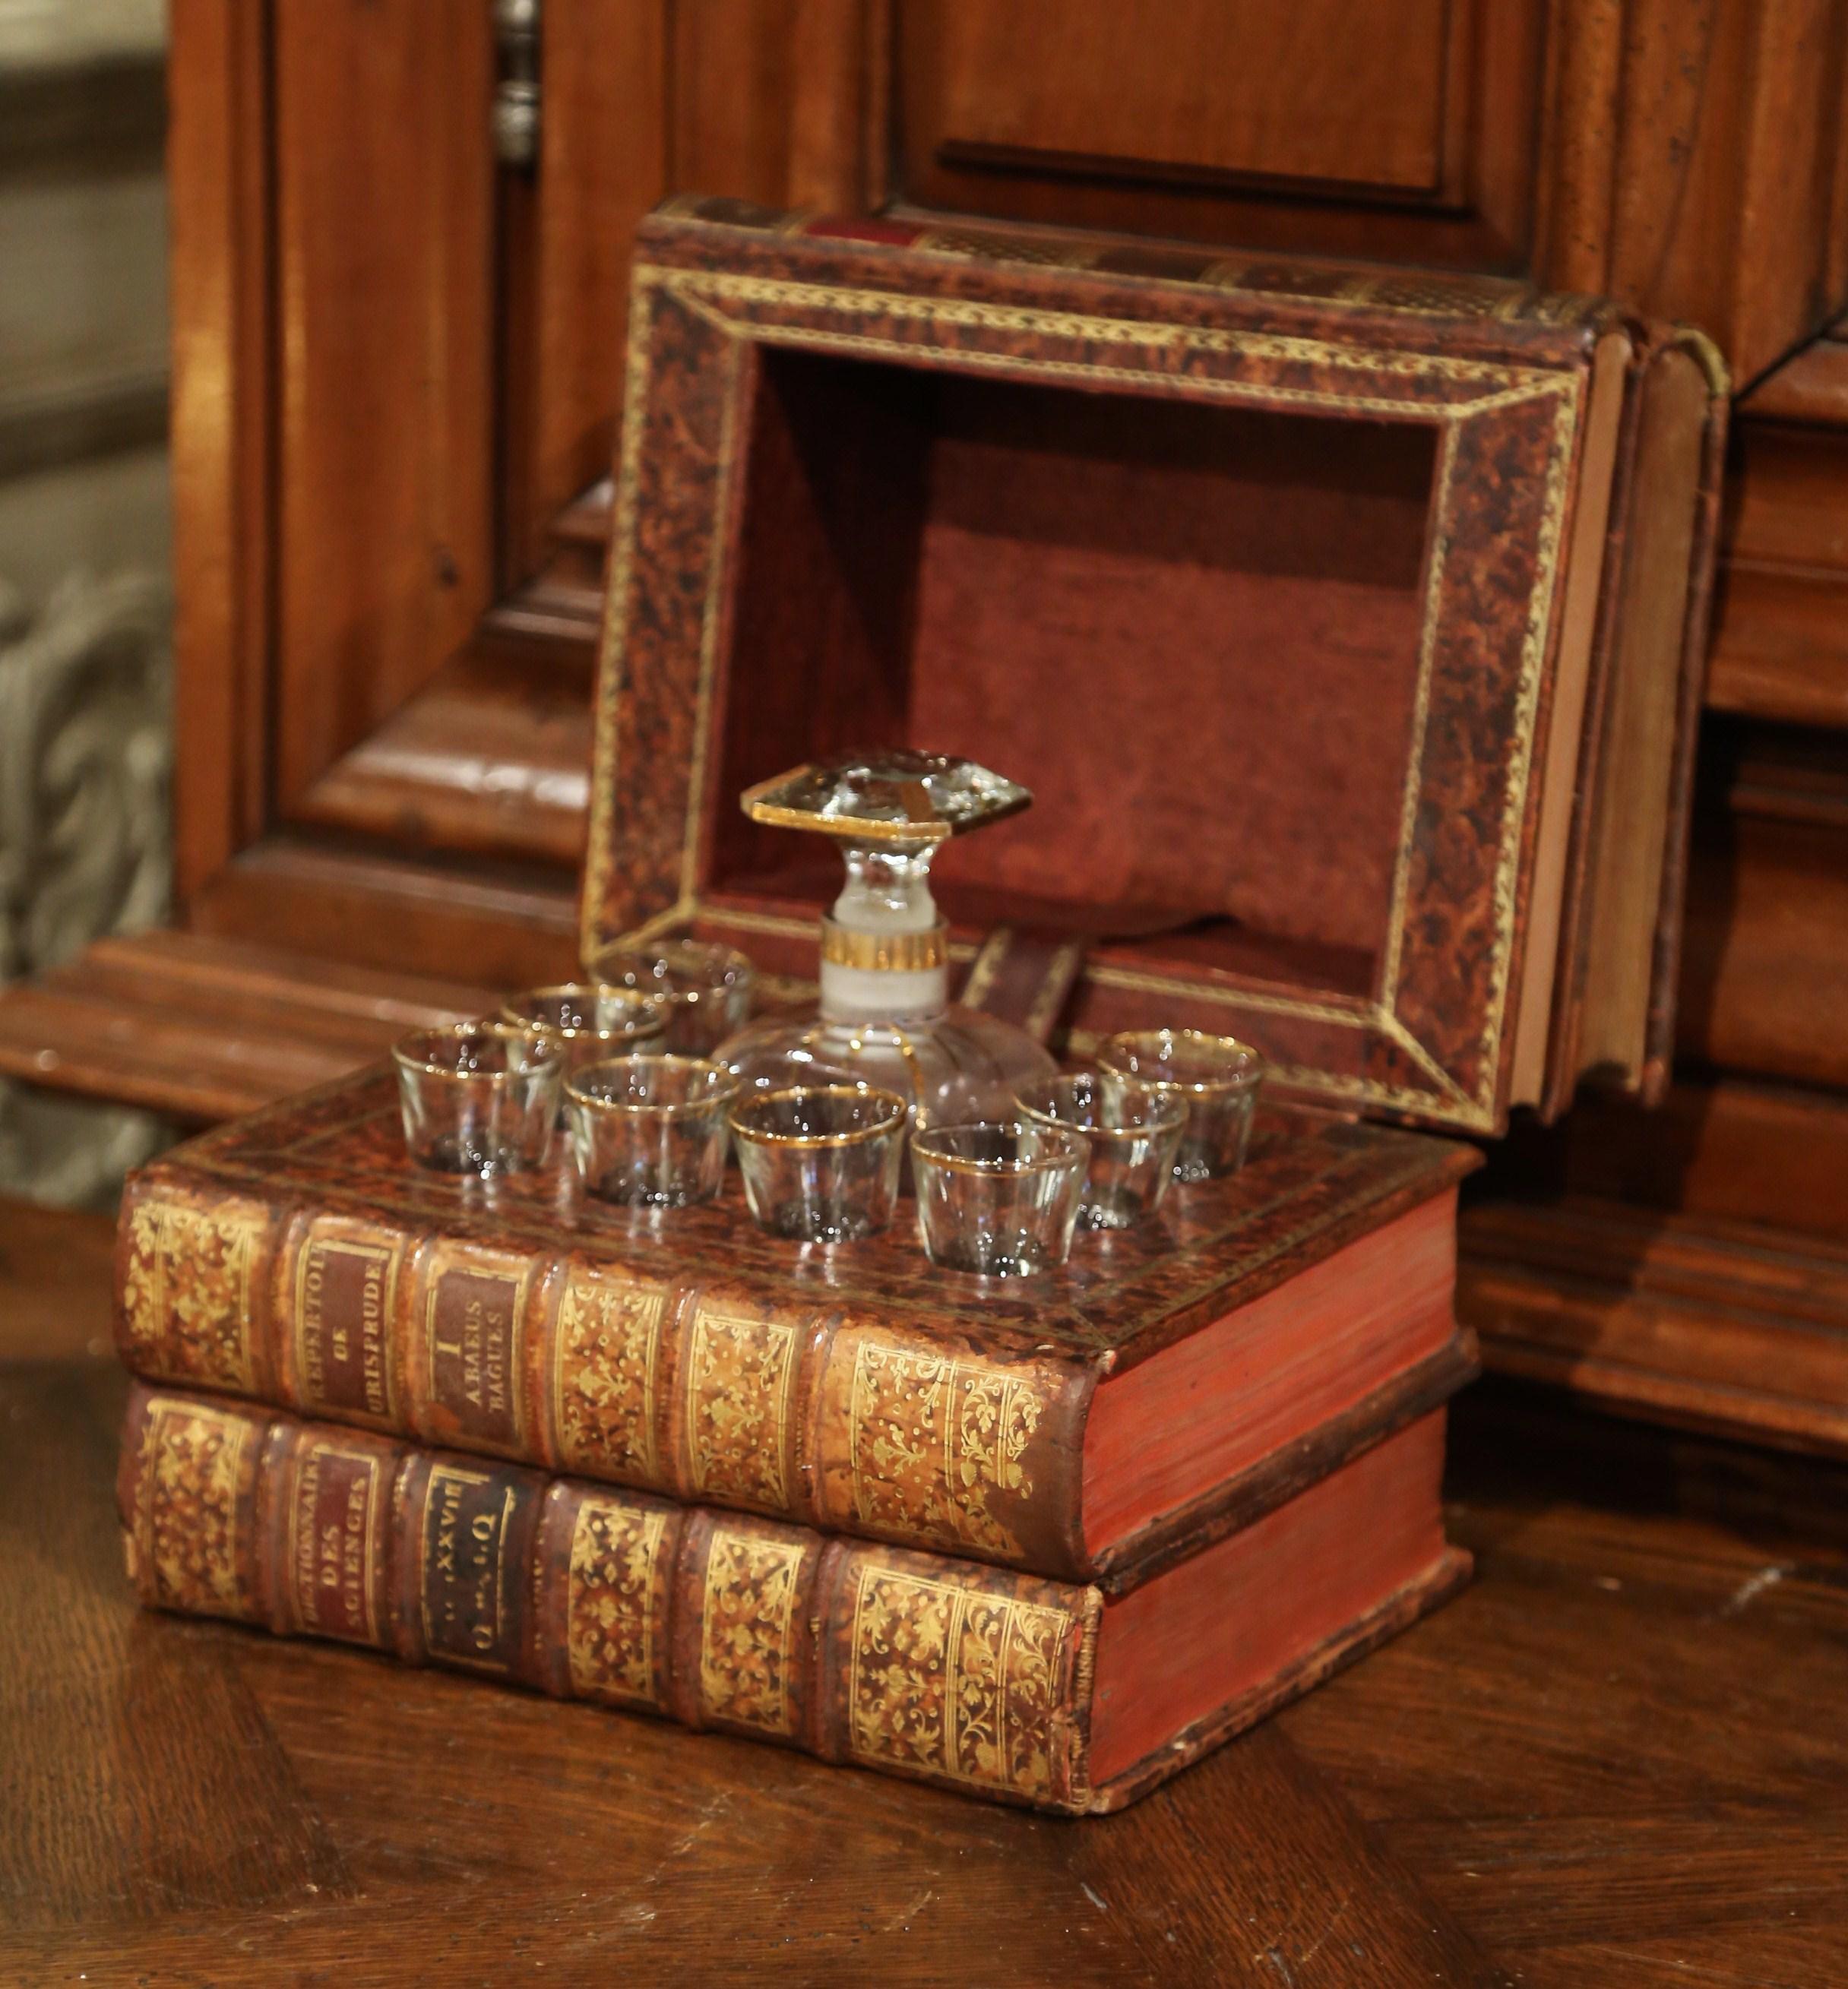 19th Century French Leather-Bound Book Liquor Box with 8 Shot Glasses and Carafe 2